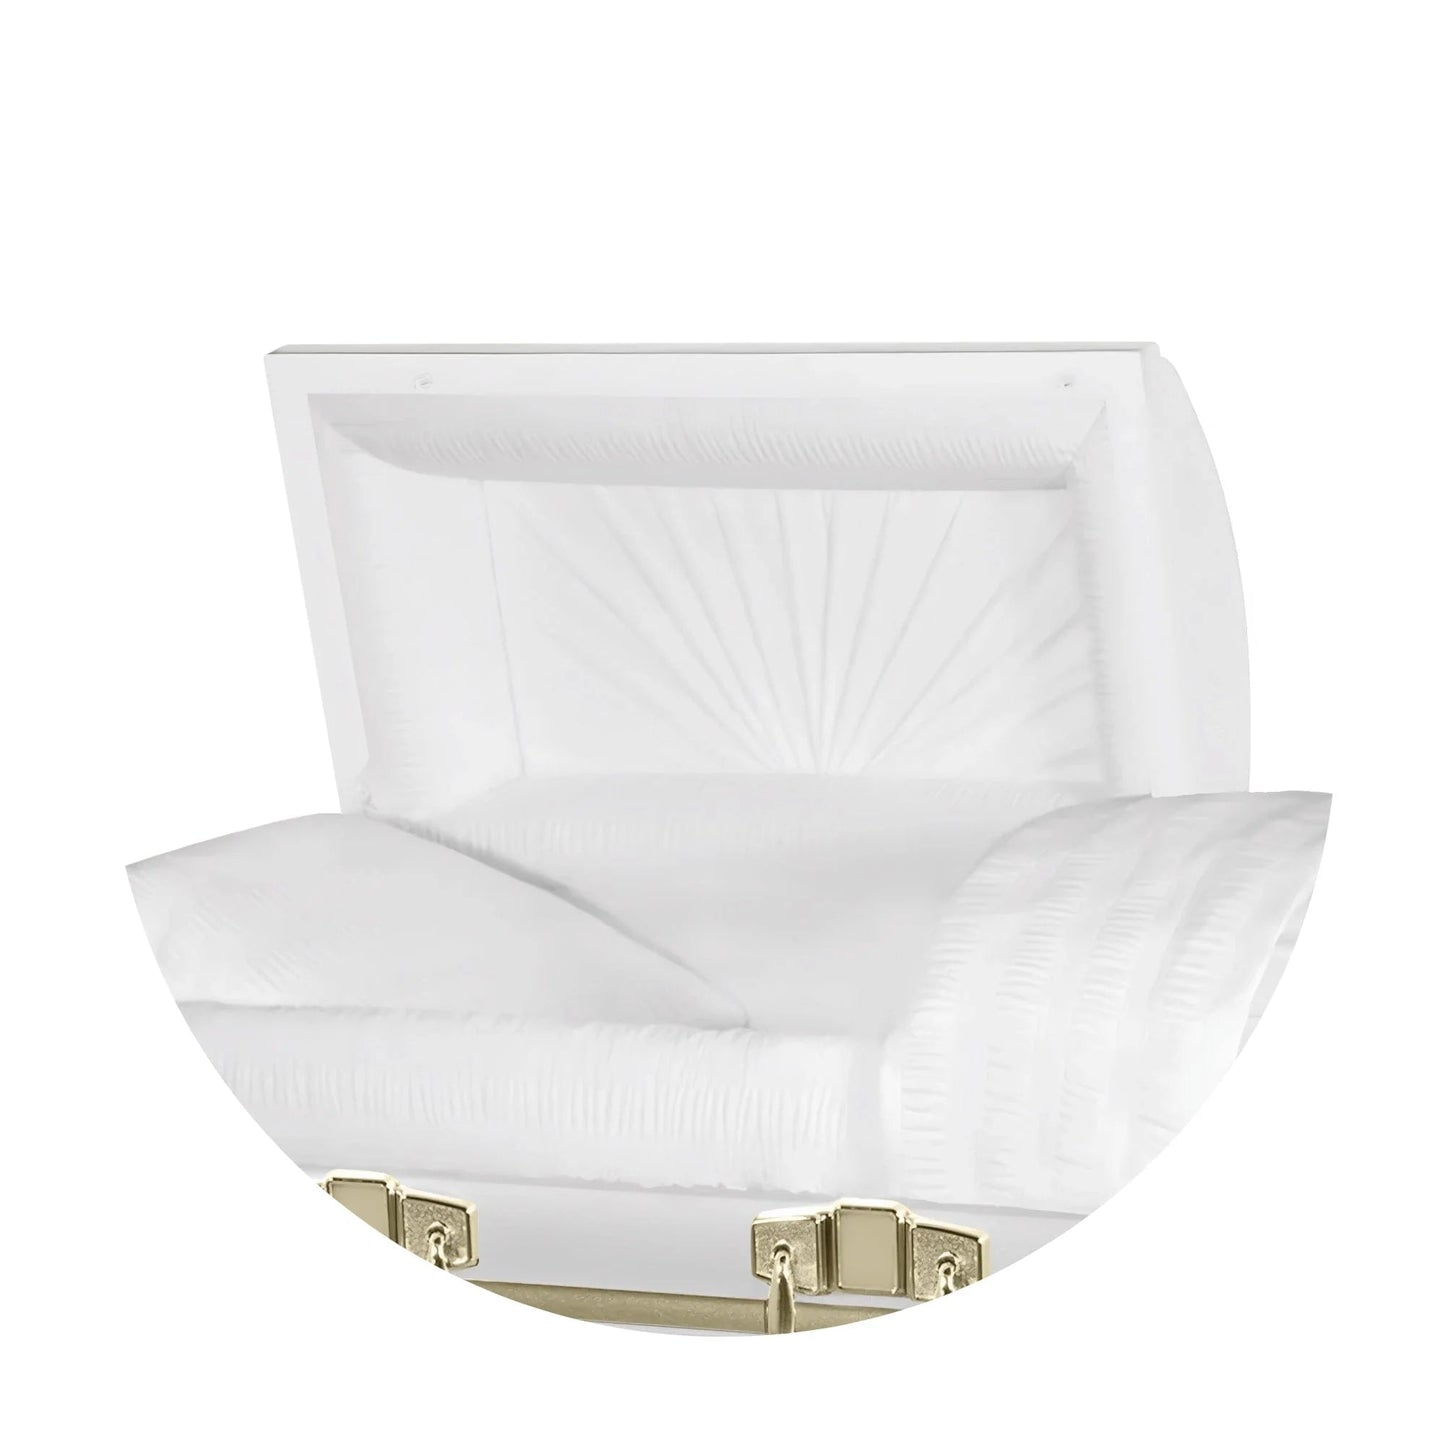 Everest Extra Long 7'2" | White and Gold Steel Oversize Casket with White Interior | 28″, 33″